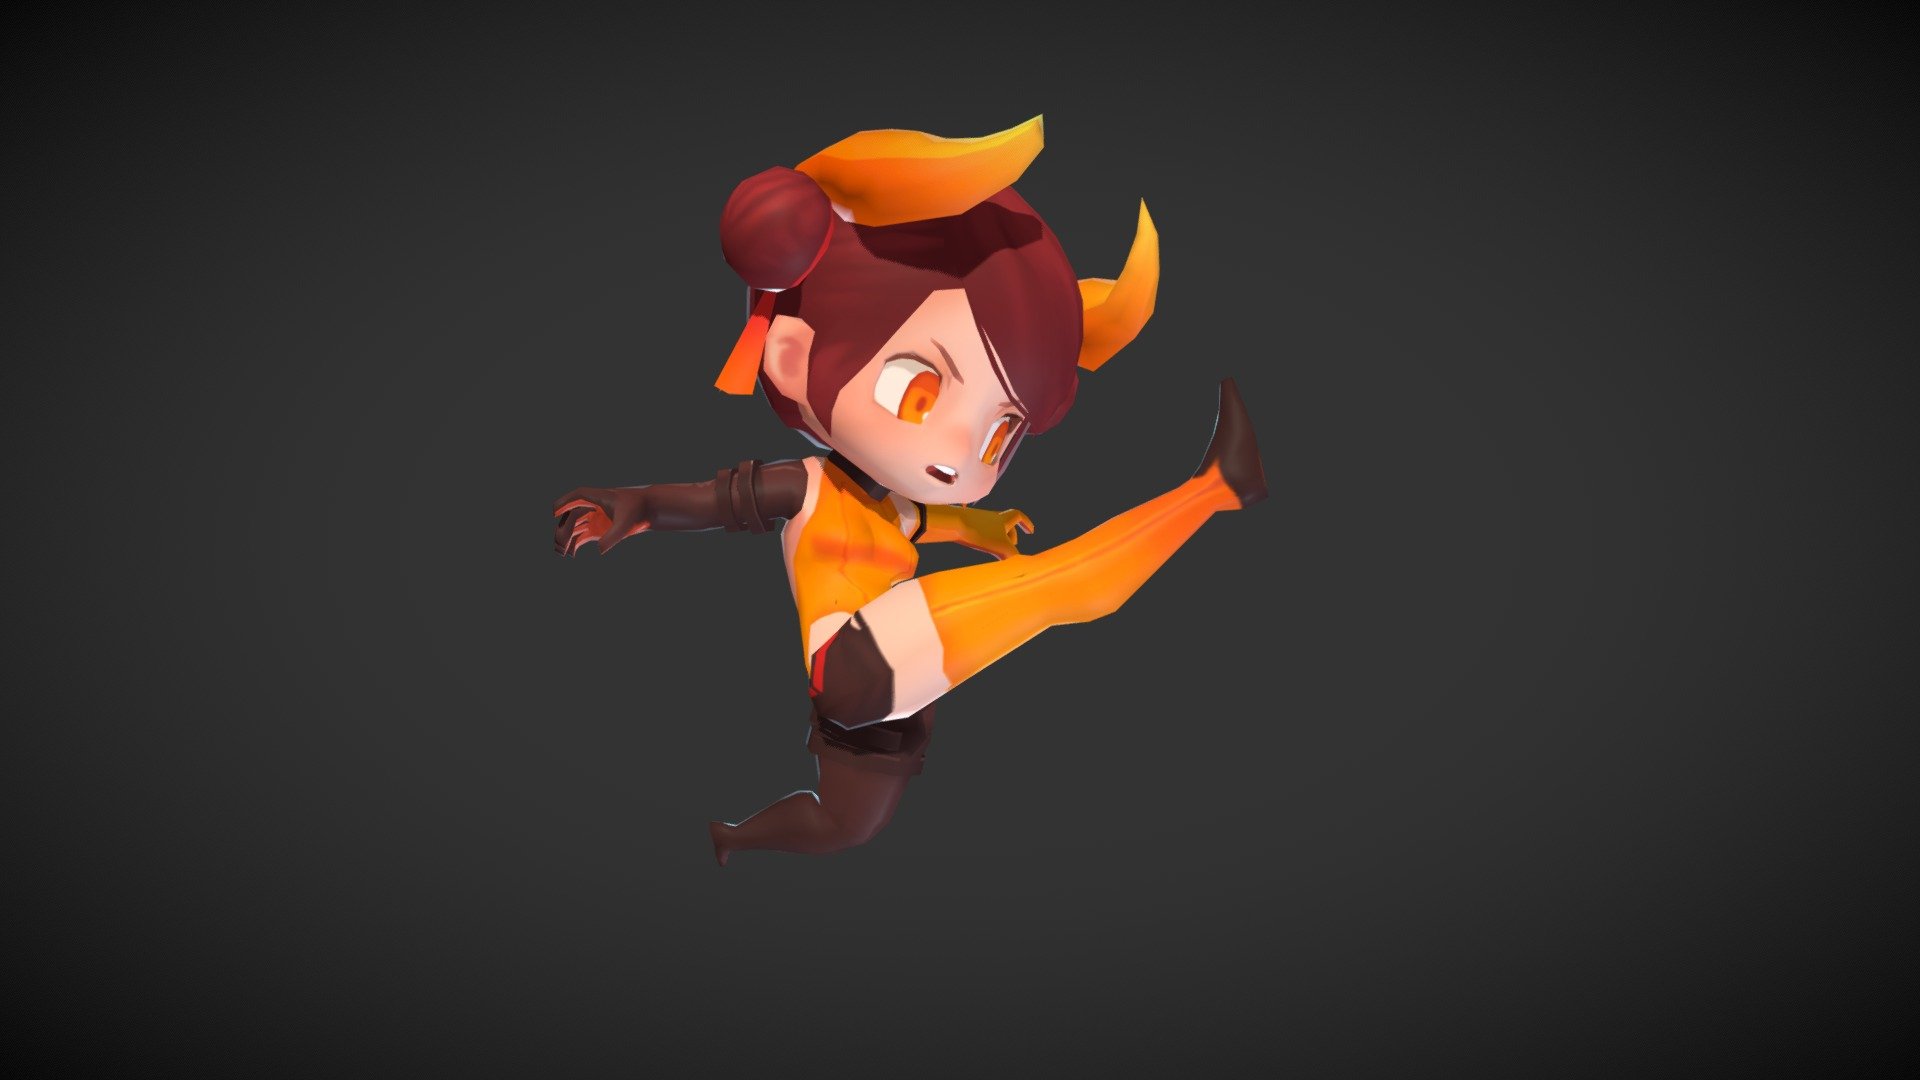 A character for a side-scrolling action game prototype.
I originally wanted to make it 2D, but it was a pain in the ass to make iterations.
The project had to be dropped anyway, because it was too big for my small team.
Still, it was fun to learn some new stuff~
Now I'm working on a mobile 4Xgame.
www.togglegear.com - Kgirls01 - Download Free 3D model by nuulbee 3d model